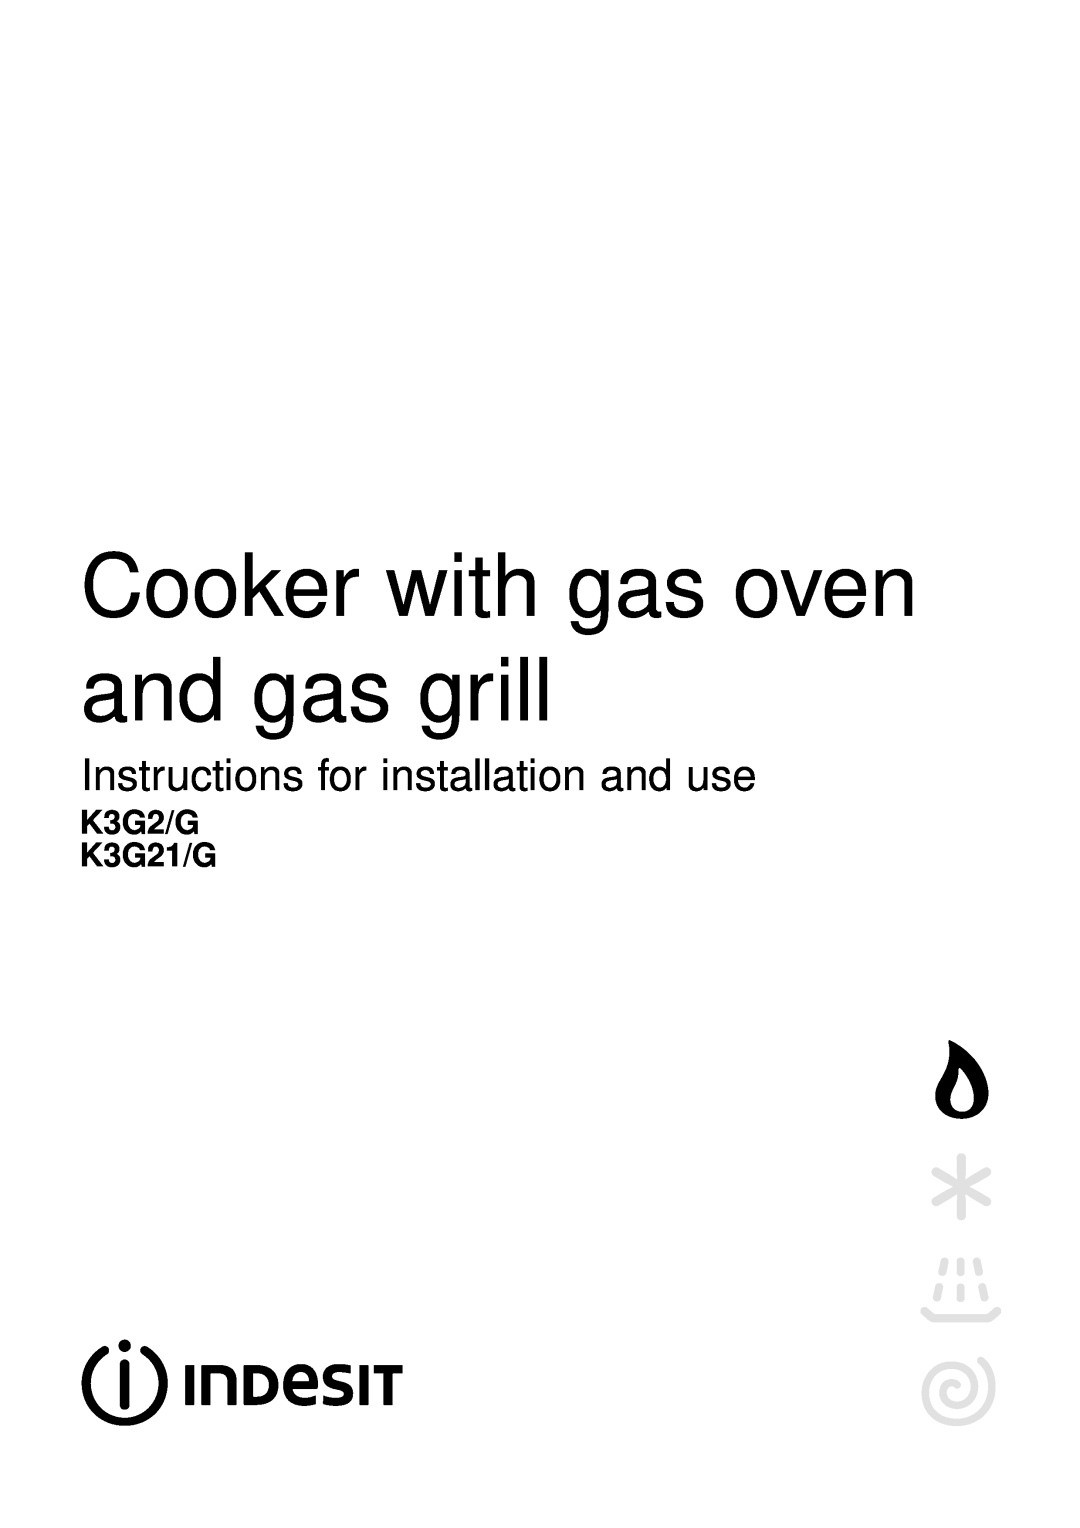 Ariston manual Cooker with gas oven and gas grill, Instructions for installation and use, K3G2/G K3G21/G 